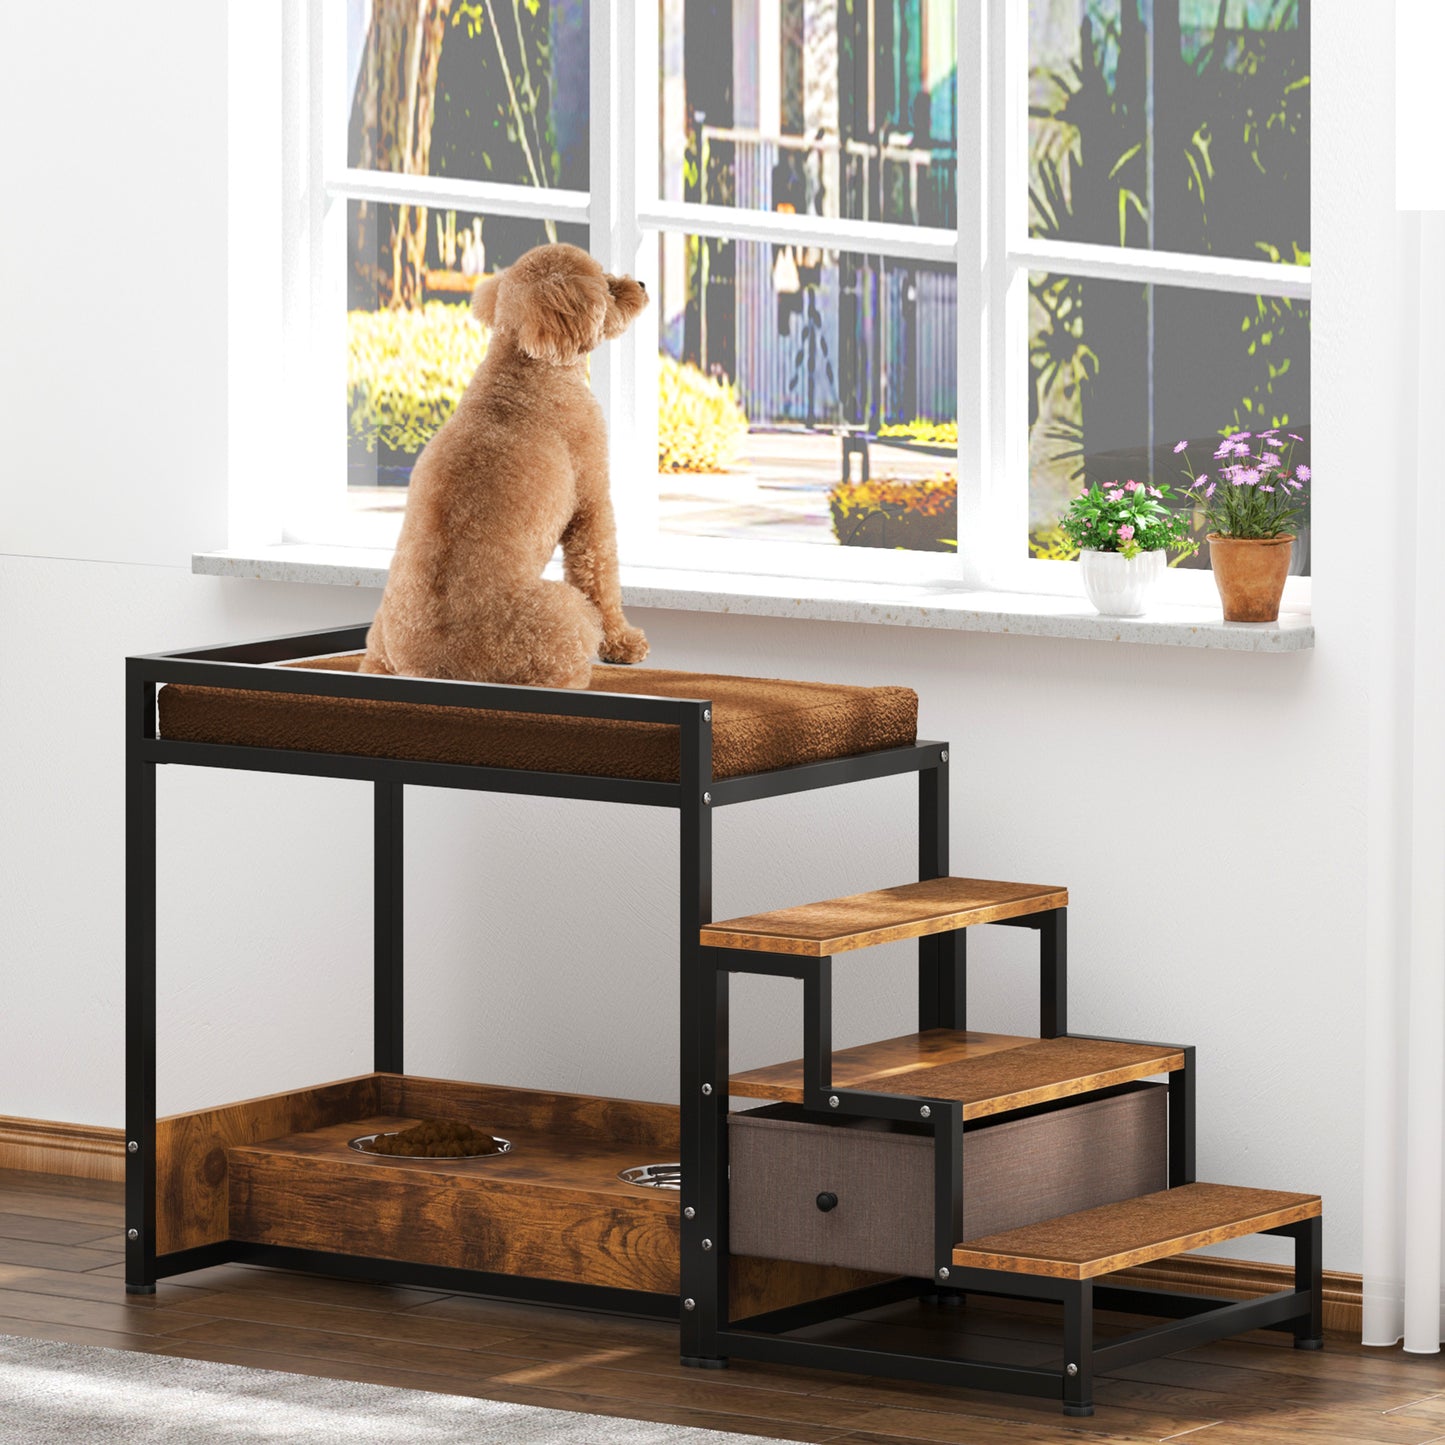 Soges Modern Design Pet Dog Window Steps, Wooden Pet Furniture, Can be Disassembled and Washed Sponge Mat, Small and Medium-Sized Pet Dog Use